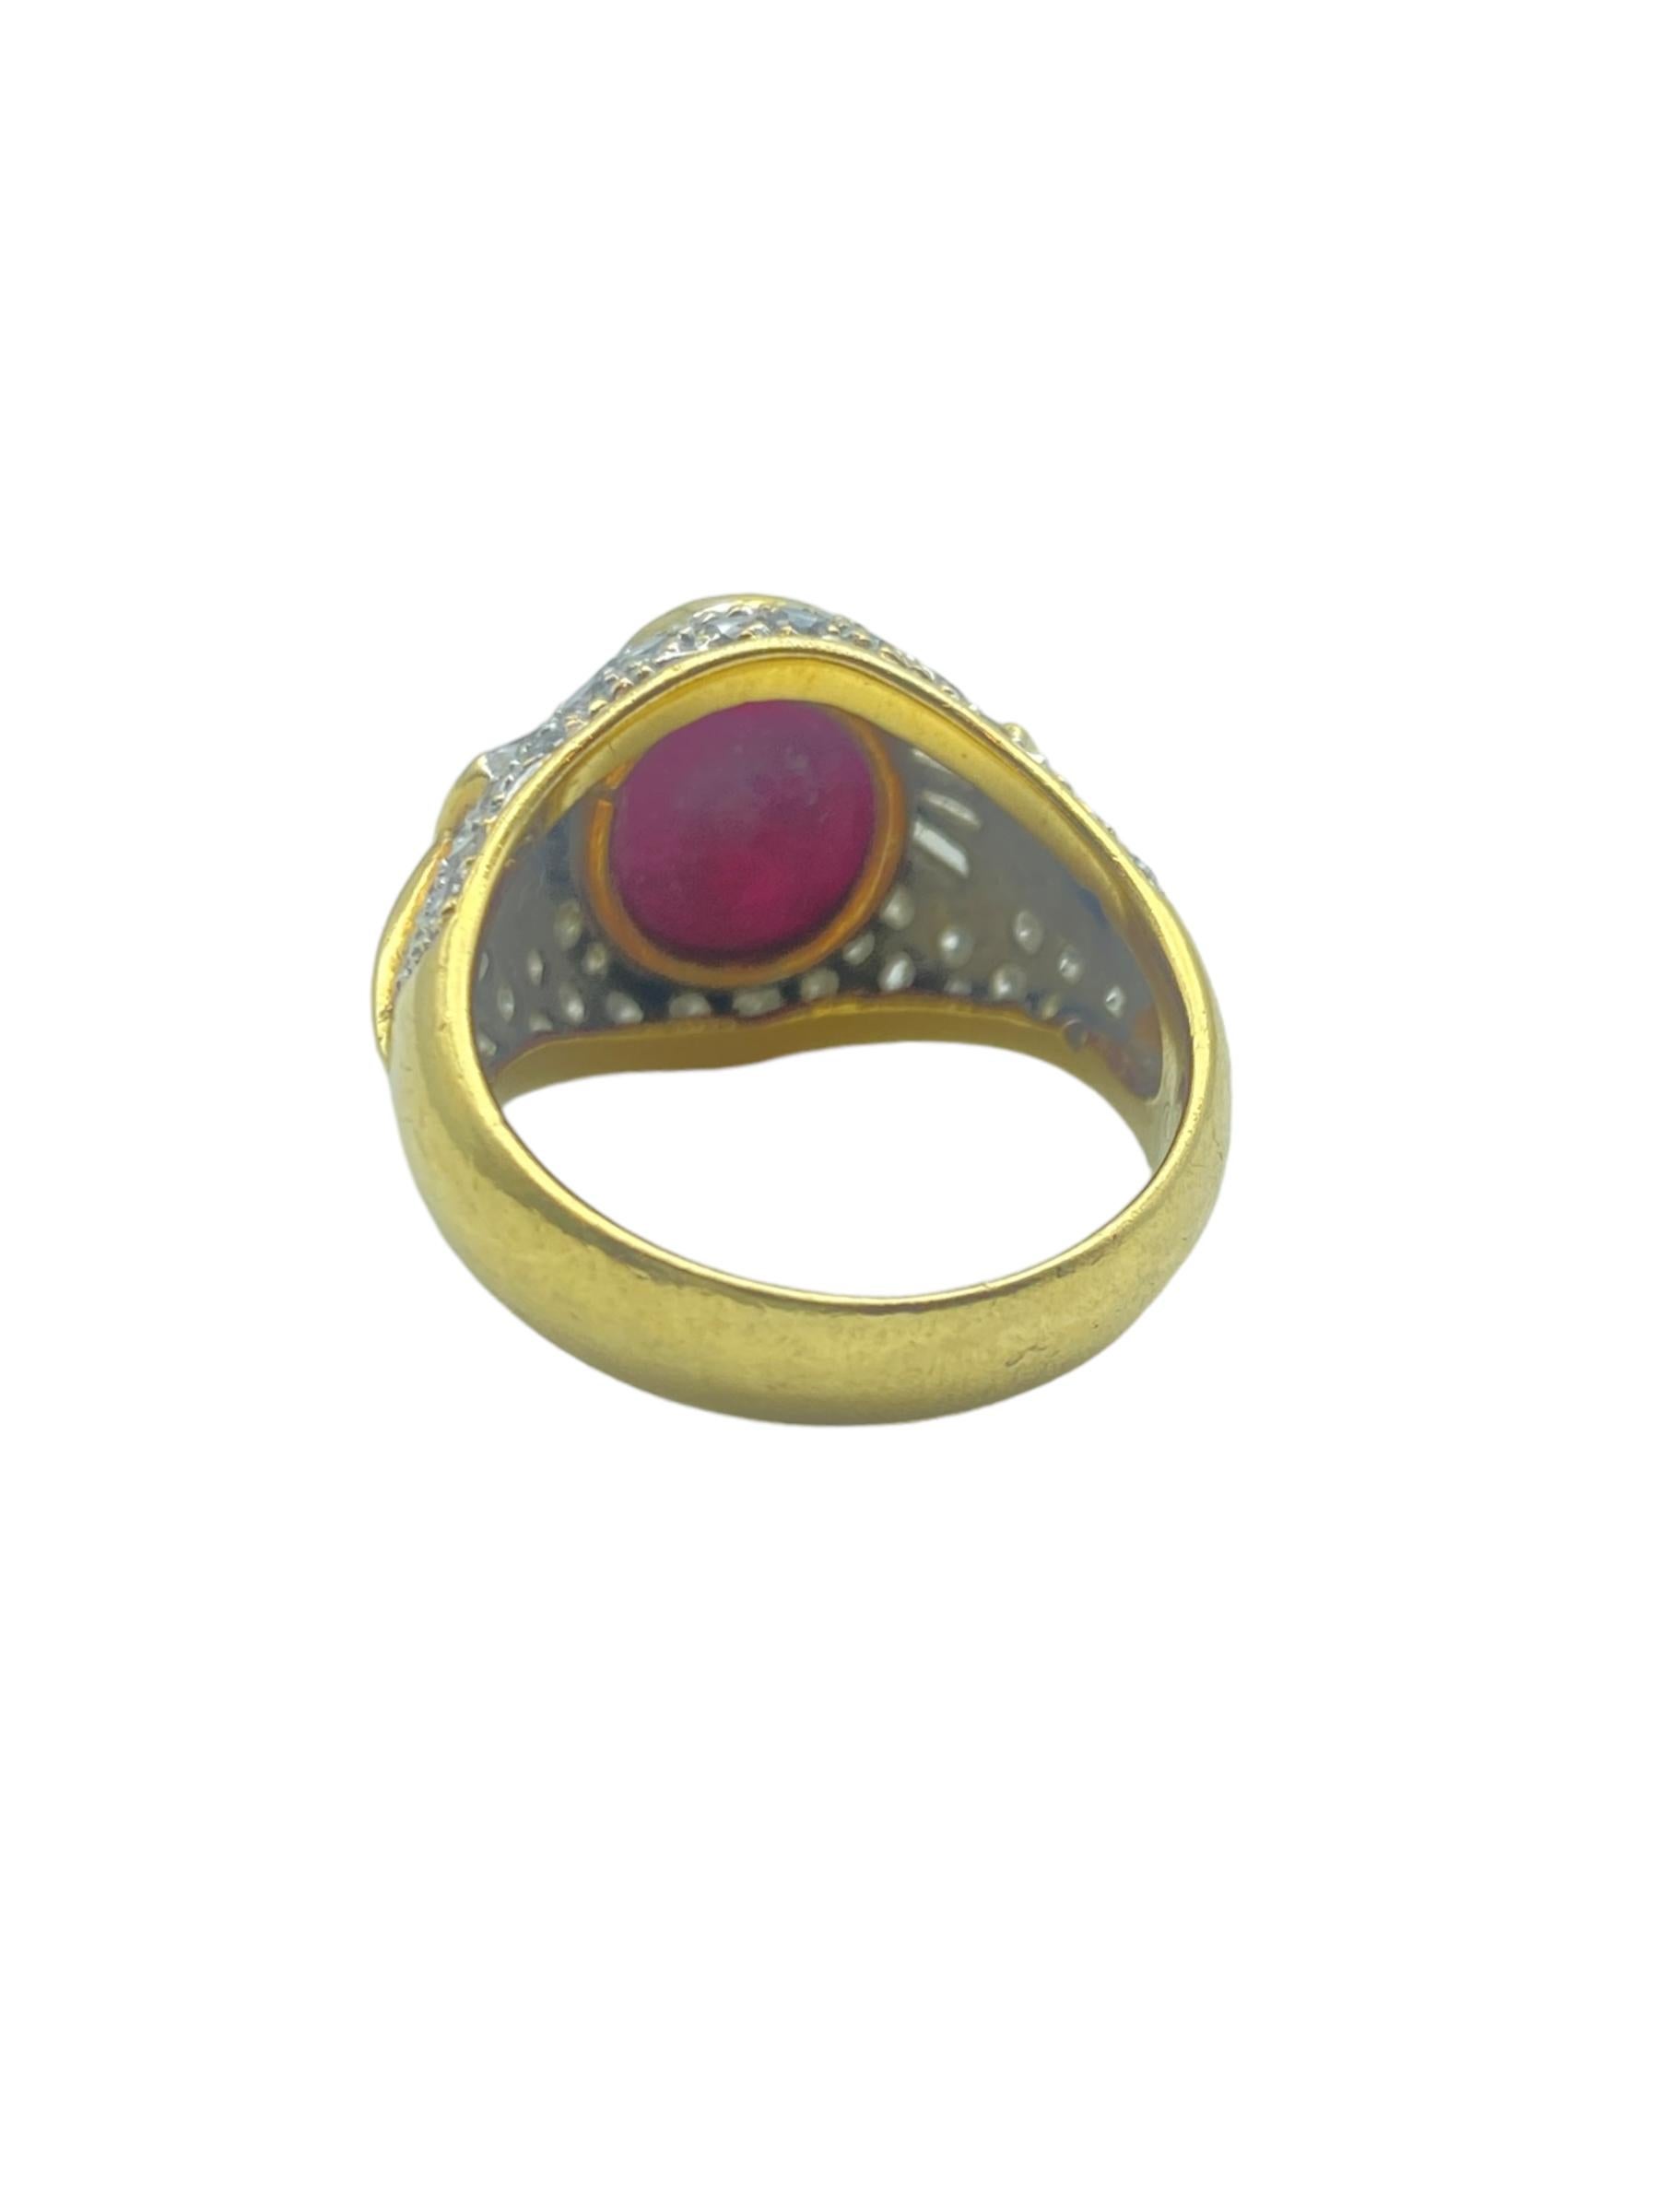 18K 4.50 Ct Blood Red Ruby & 1.60 Ct Diamond Solitaire Ring In Excellent Condition For Sale In Laguna Hills, CA